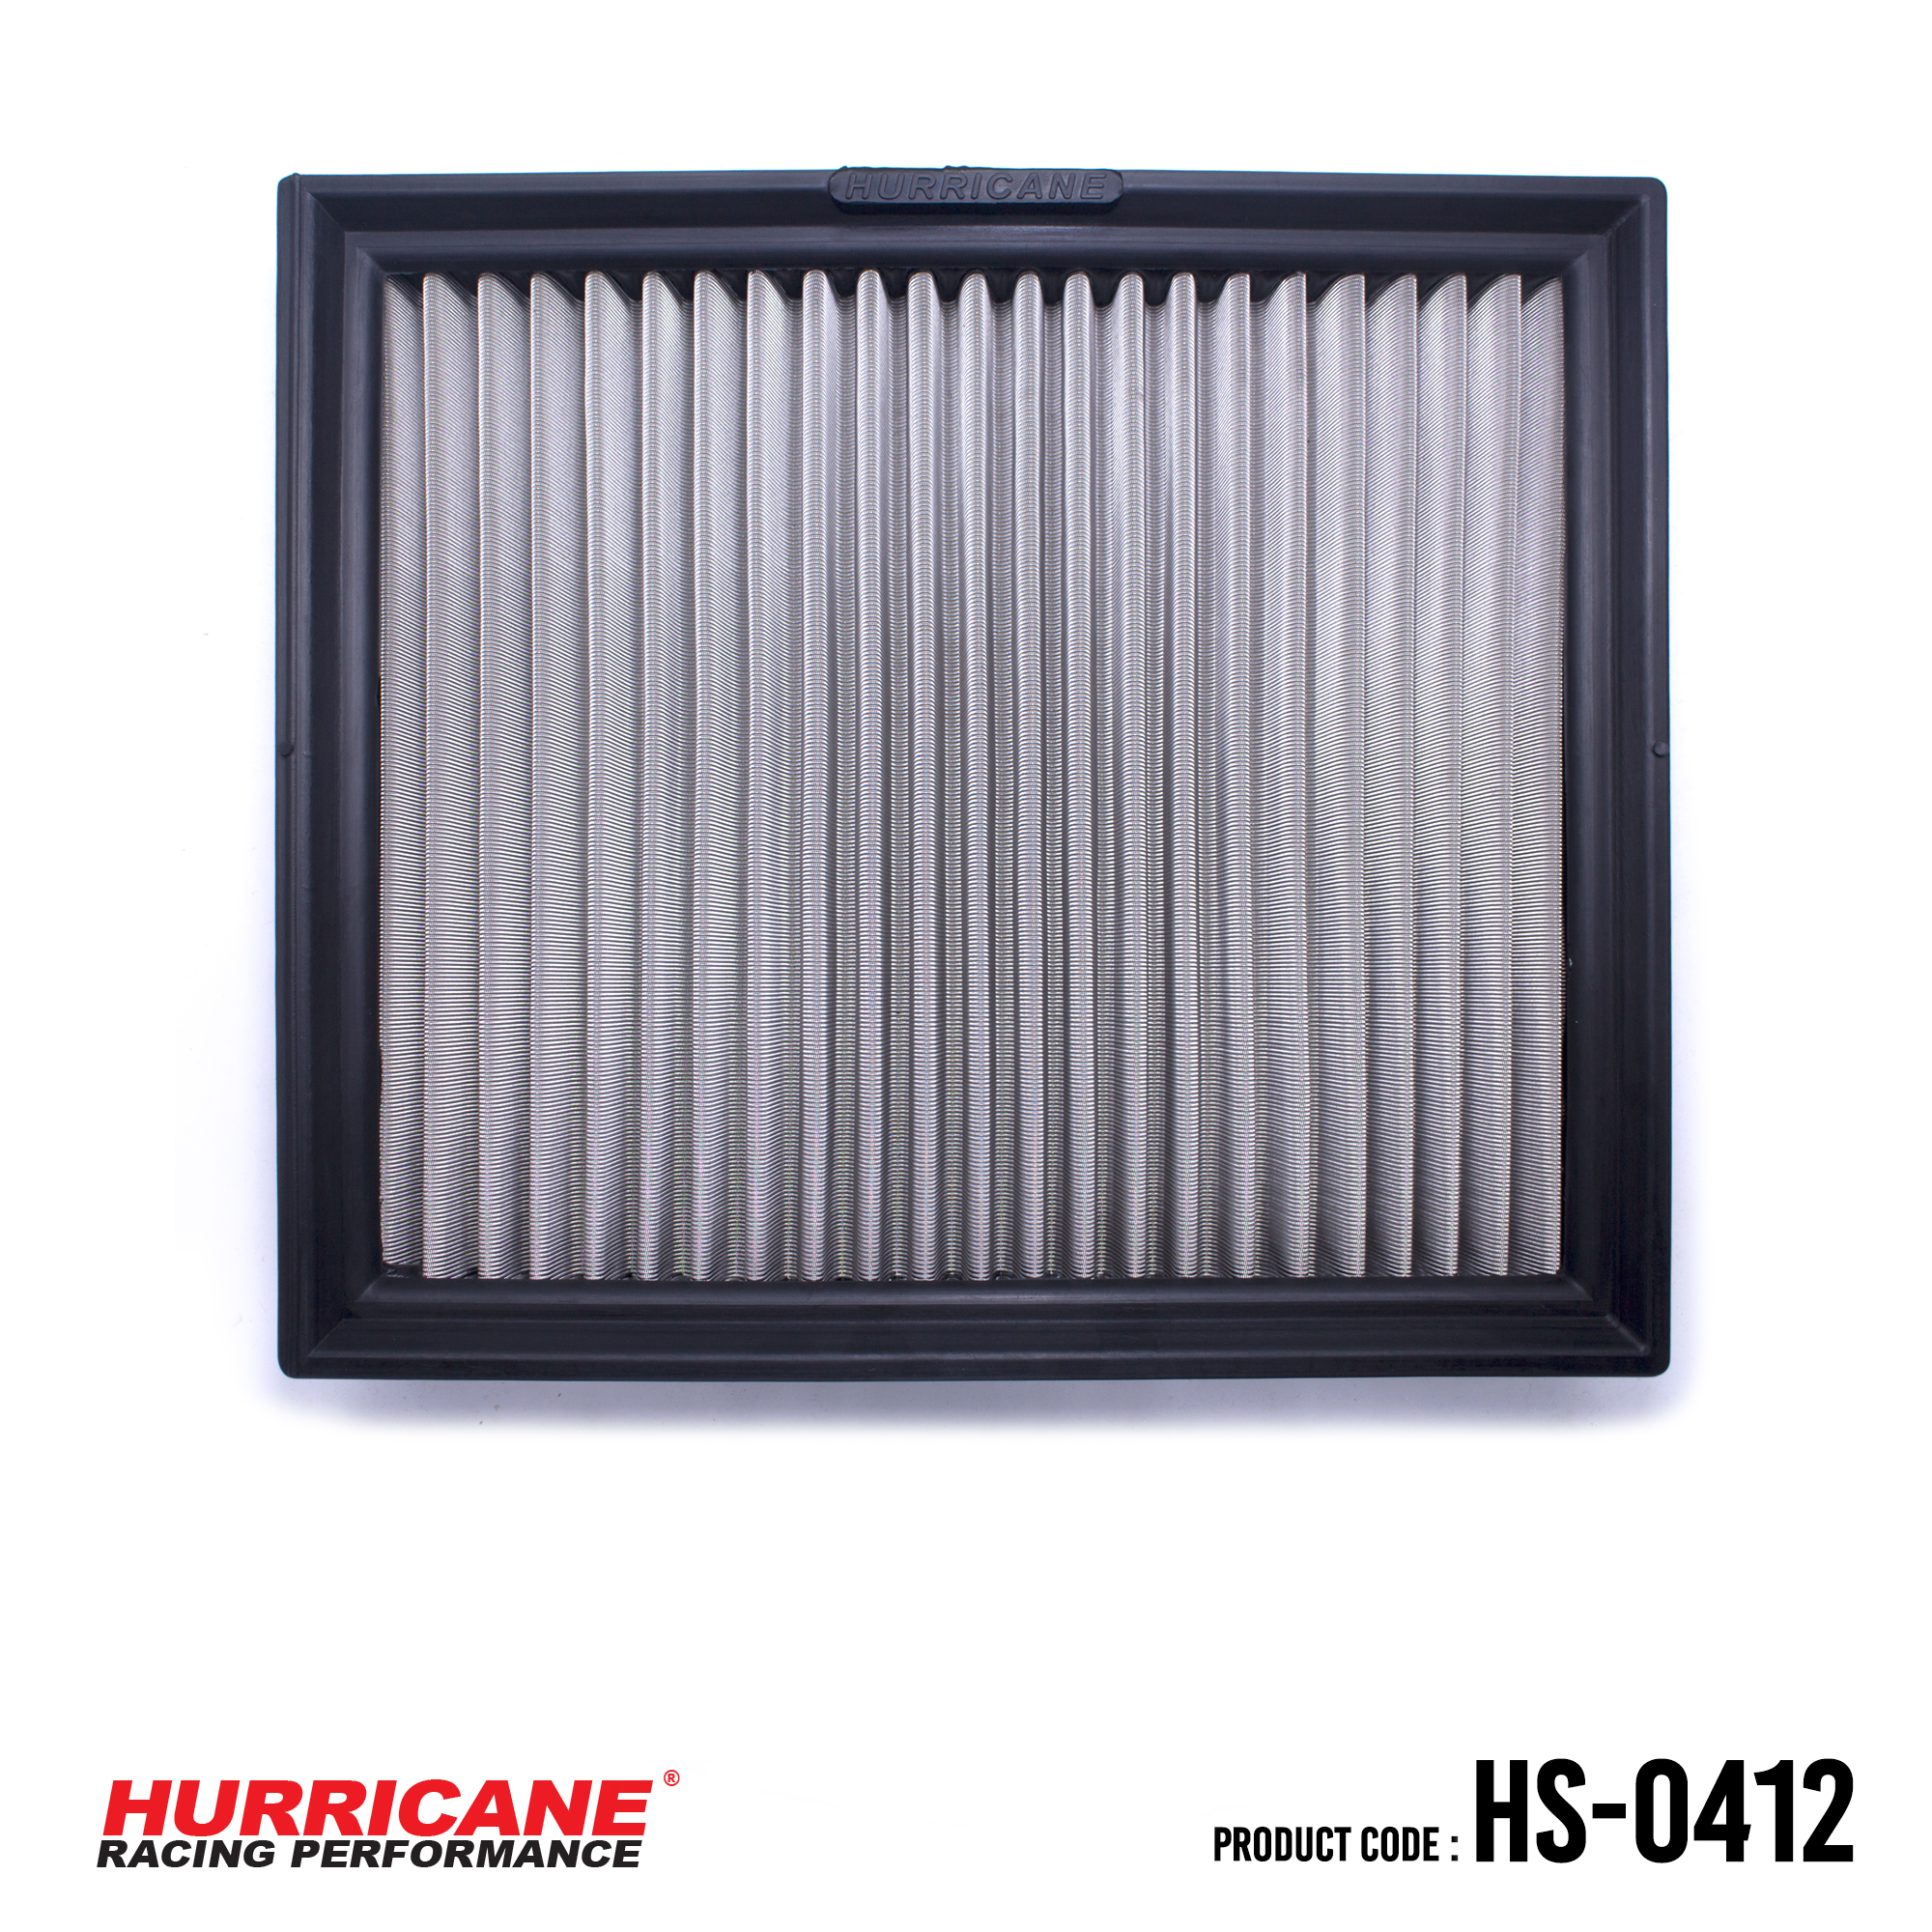 HURRICANE STAINLESS STEEL AIR FILTER FOR HS-0412 MG